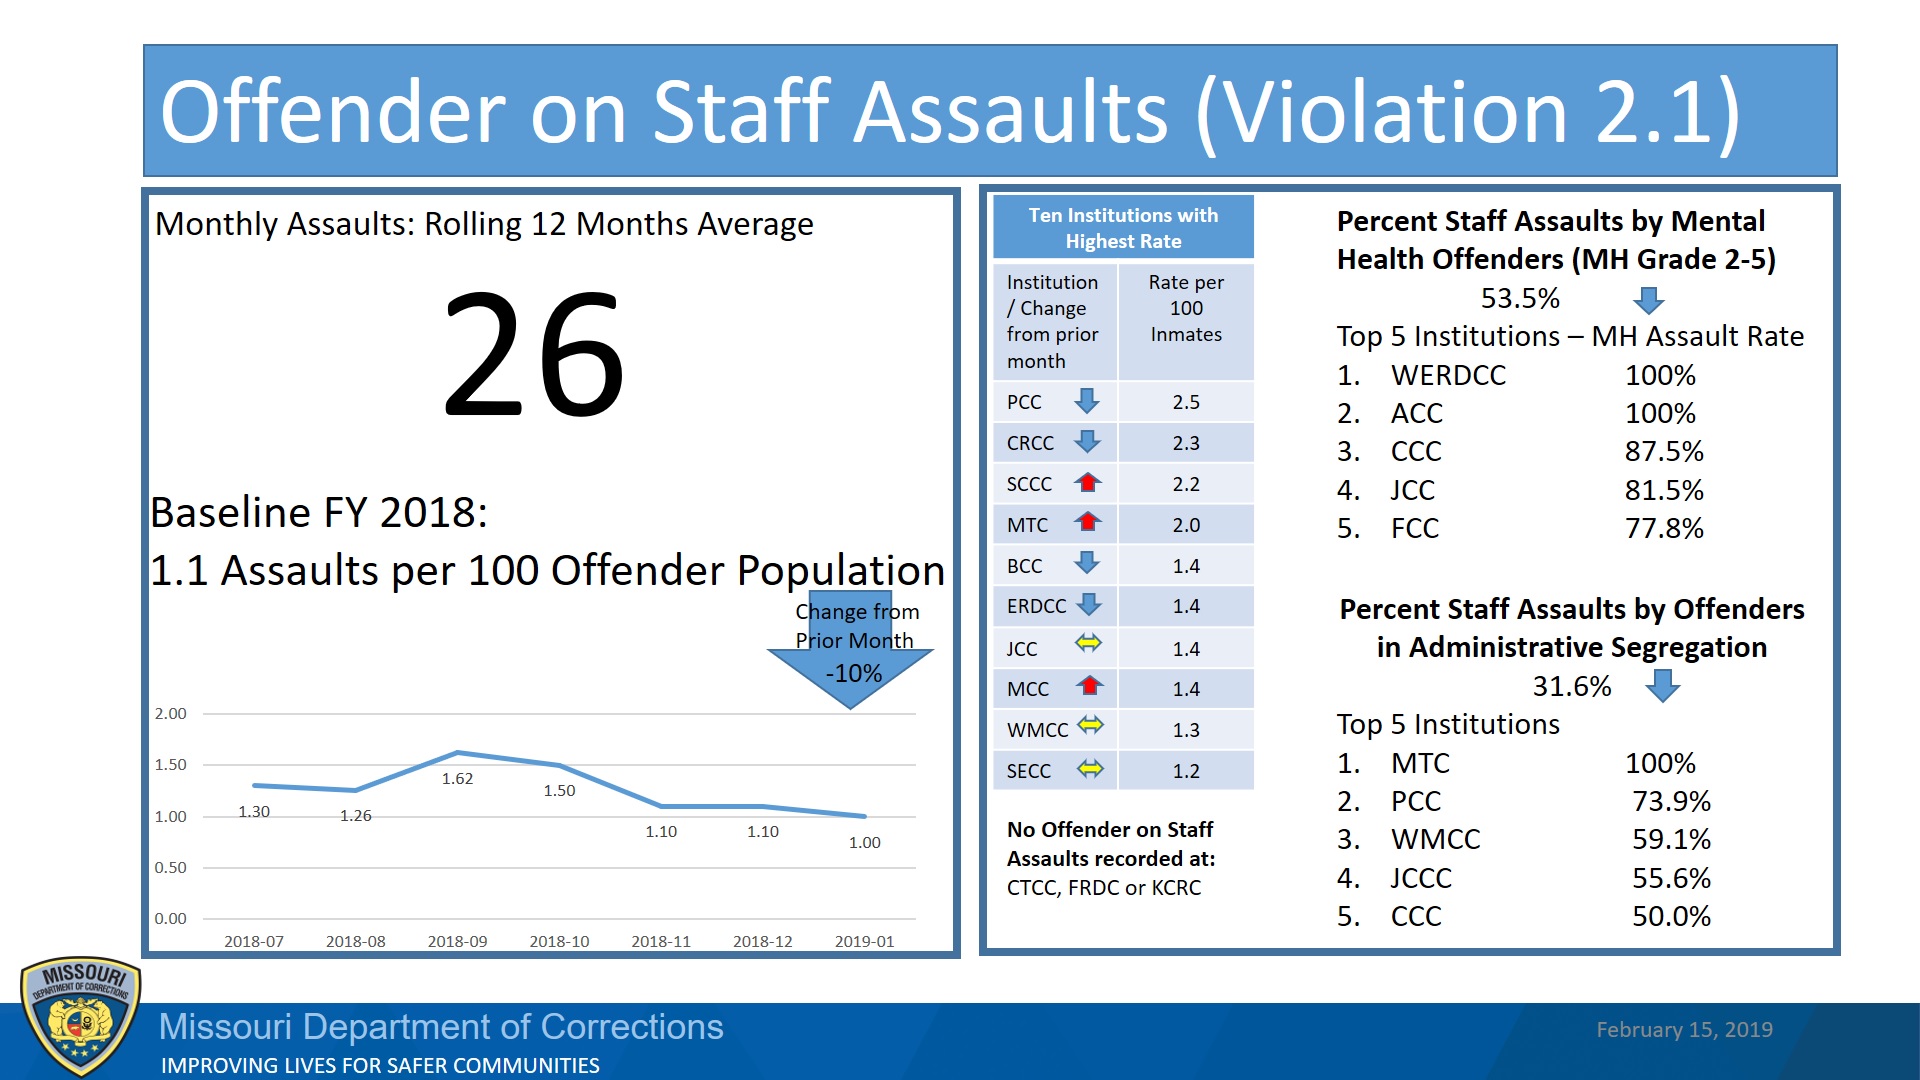 Offender on Staff Assaults (violation 2.1). Monthly Assaults: Rolling 12 Months Average: 26. Baseline FY 2018:  1.1 Assaults per 100 Offender Population. Percent Staff Assaults by Mental Health Offenders (MH Grade 2-5) 	53.5% Top 5 Institutions – MH Assault Rate WERDCC 	100% ACC 		100% CCC		87.5% JCC		81.5% FCC		77.8%.  Percent Staff Assaults by Offenders in Administrative Segregation 31.6% Top 5 Institutions MTC 	    	100% PCC 	   	 73.9% WMCC   	 59.1% JCCC	   	 55.6% CCC         	 50.0%. 